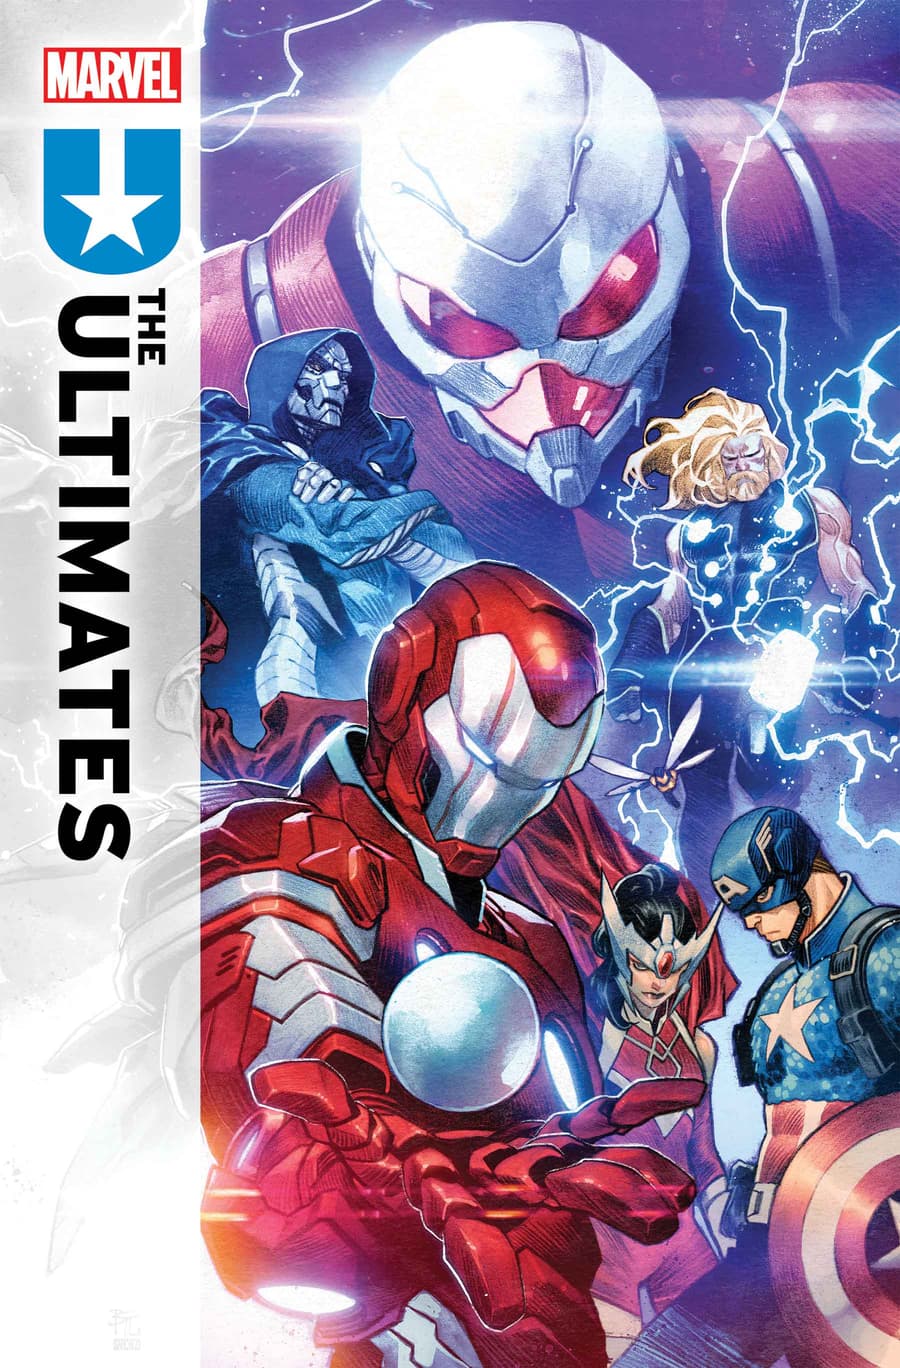 The Ultimate Universe's Mightiest Heroes Assemble in 'Ultimates